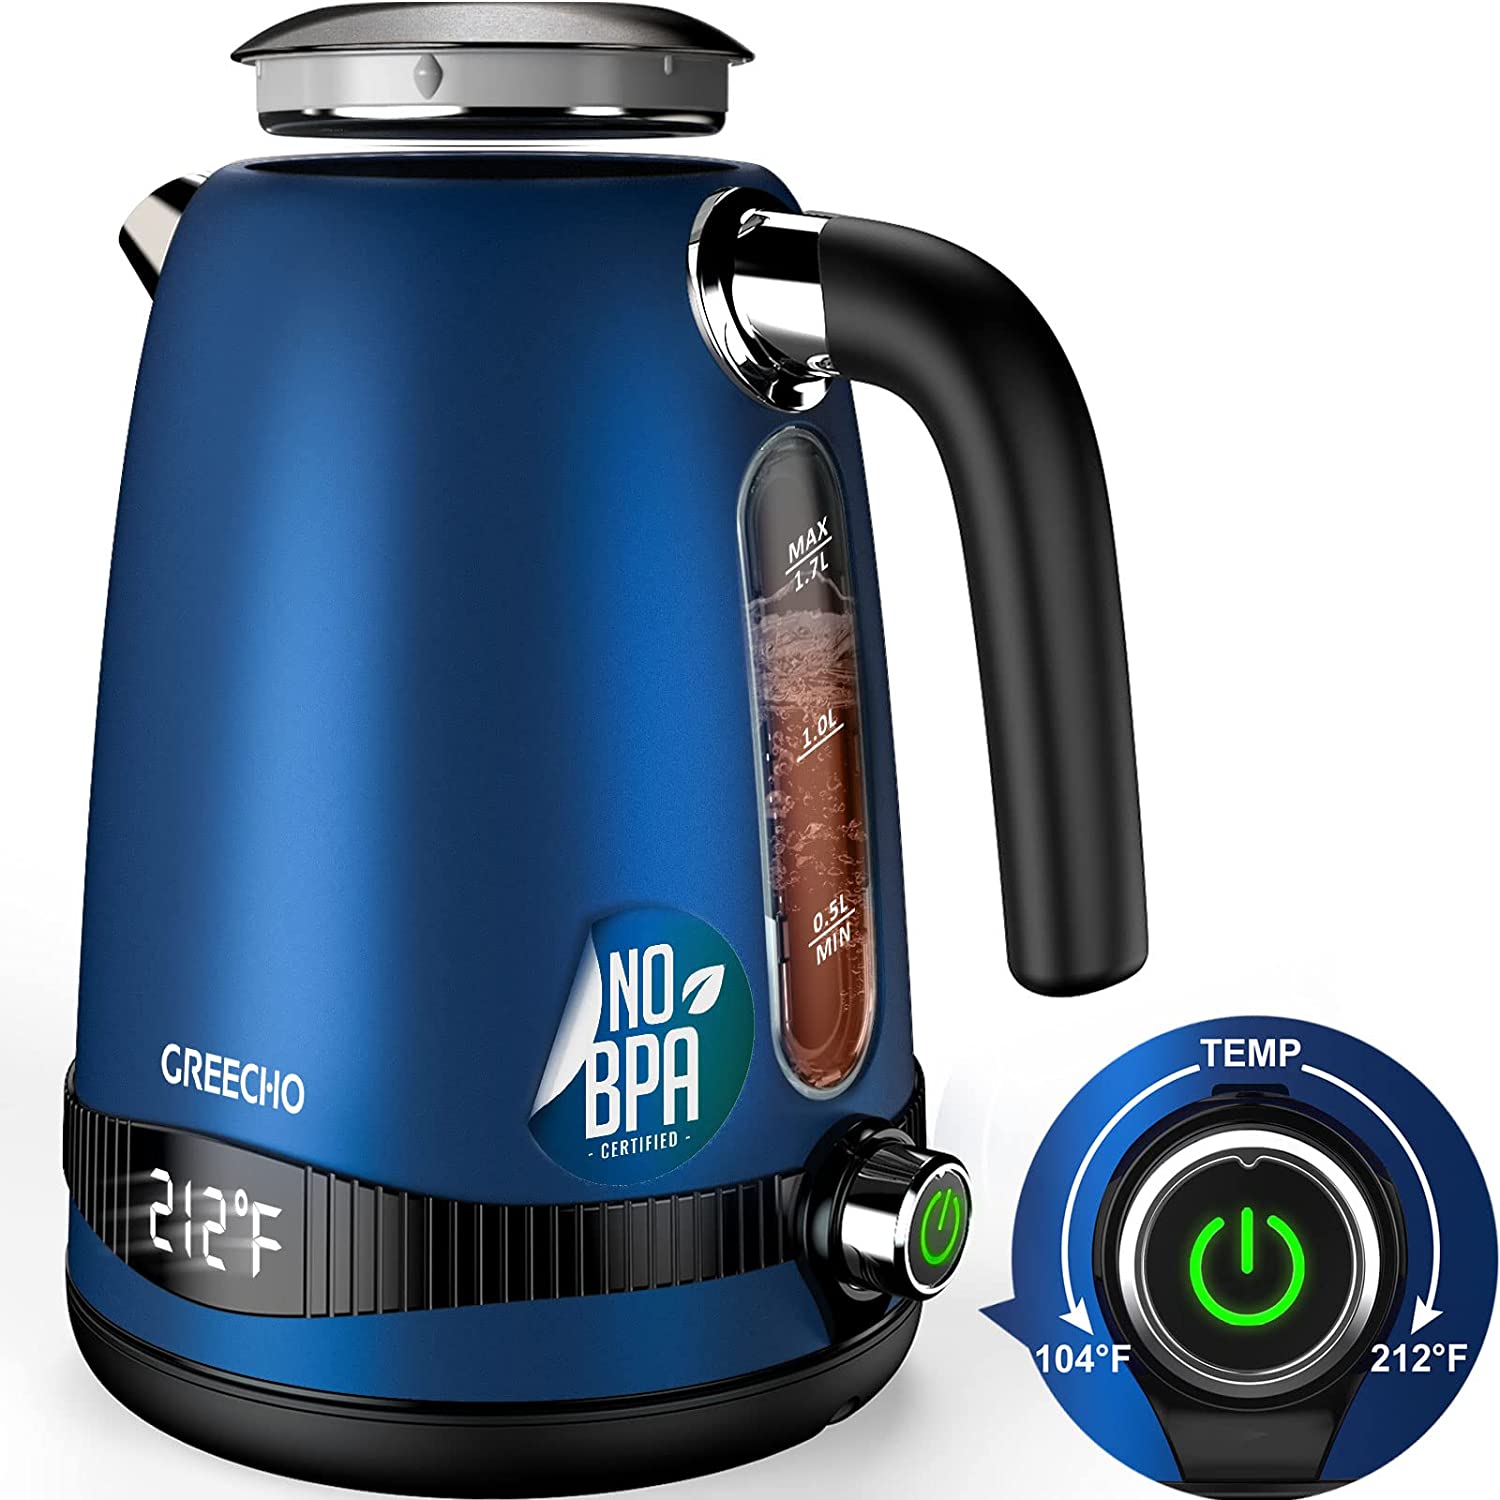 ✓ Bodum Electric Kettle VS COSORI Electric Kettle - Which